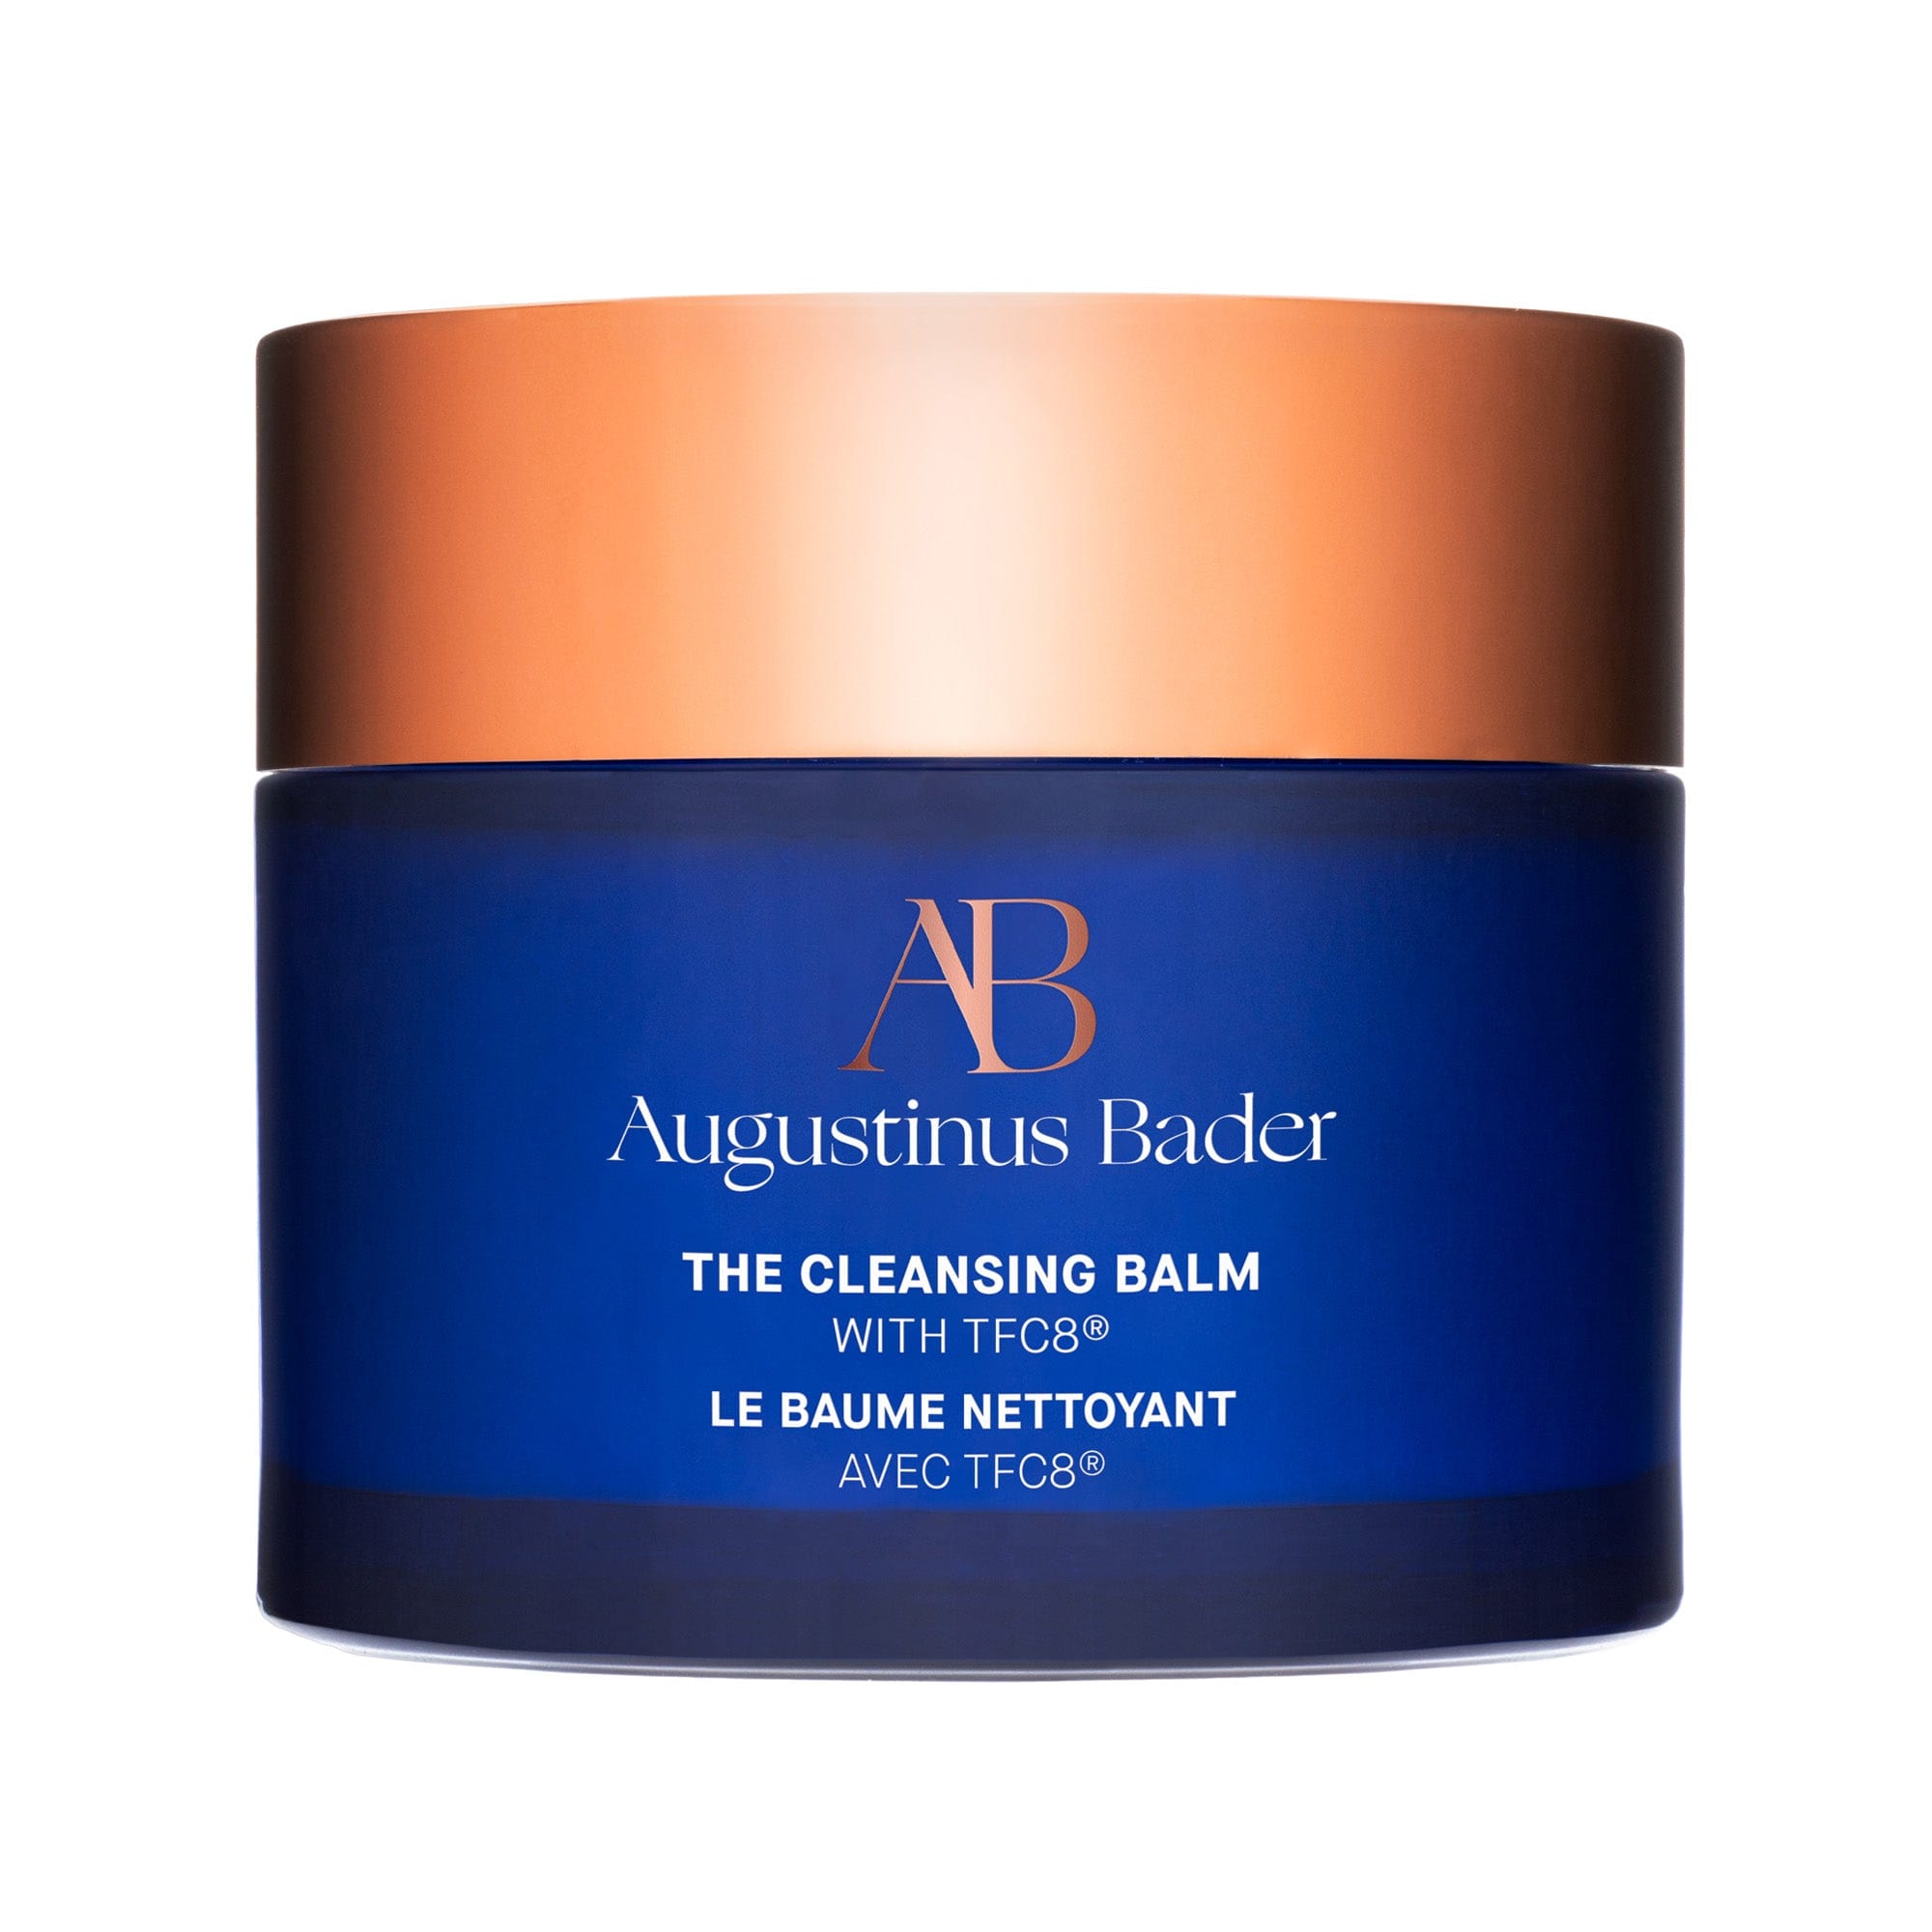 The Cleansing Balm Augustinus Bader Cleansing Balm